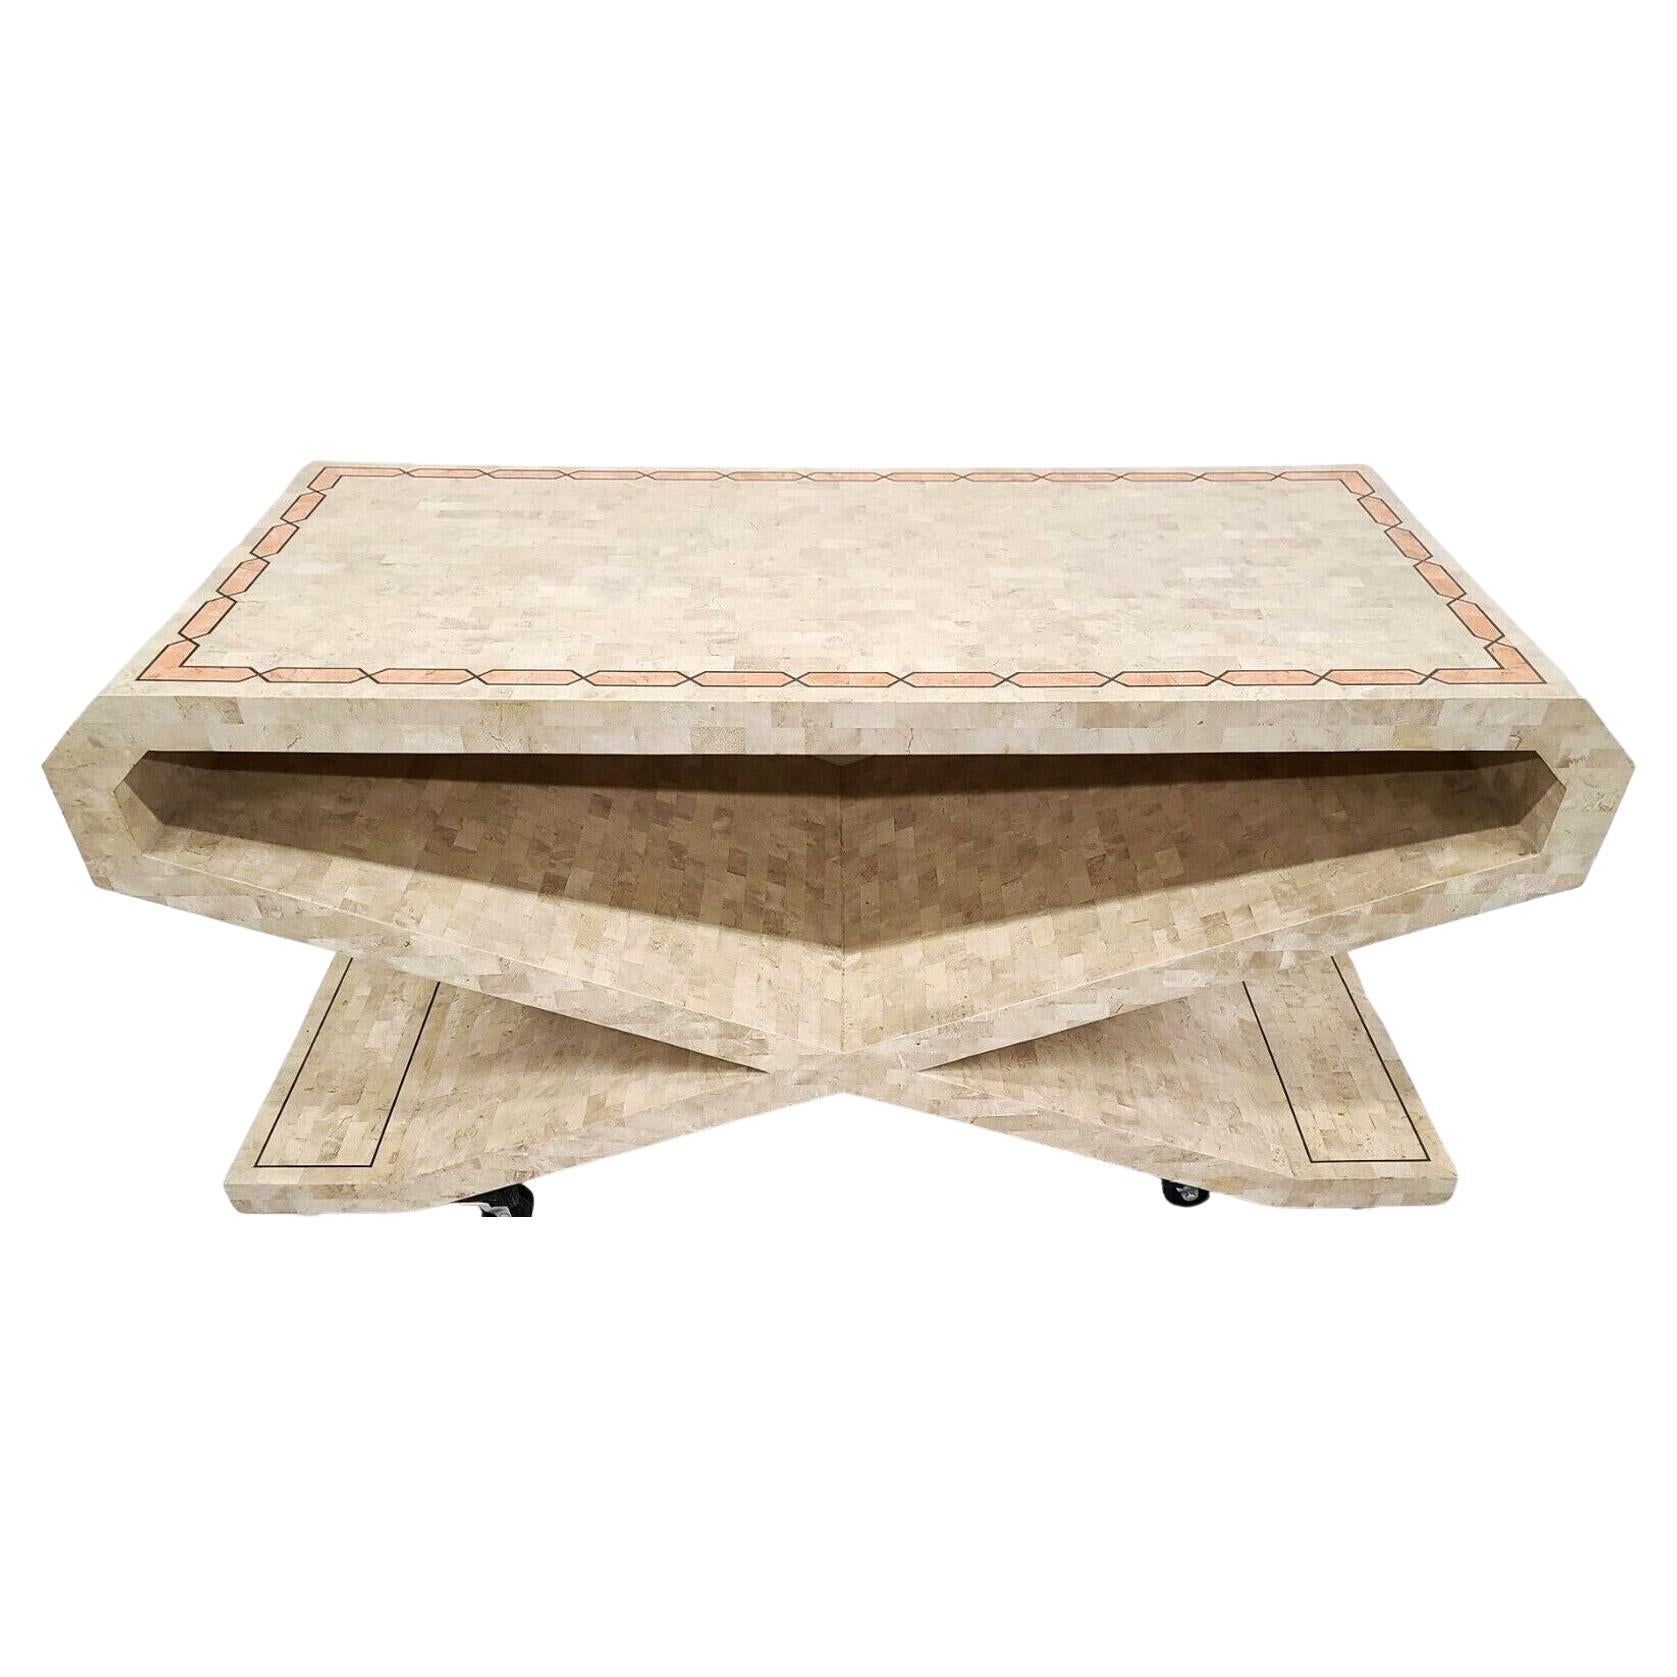 Signed Vintage Tessellated Stone Console or Dining Table Base For Sale